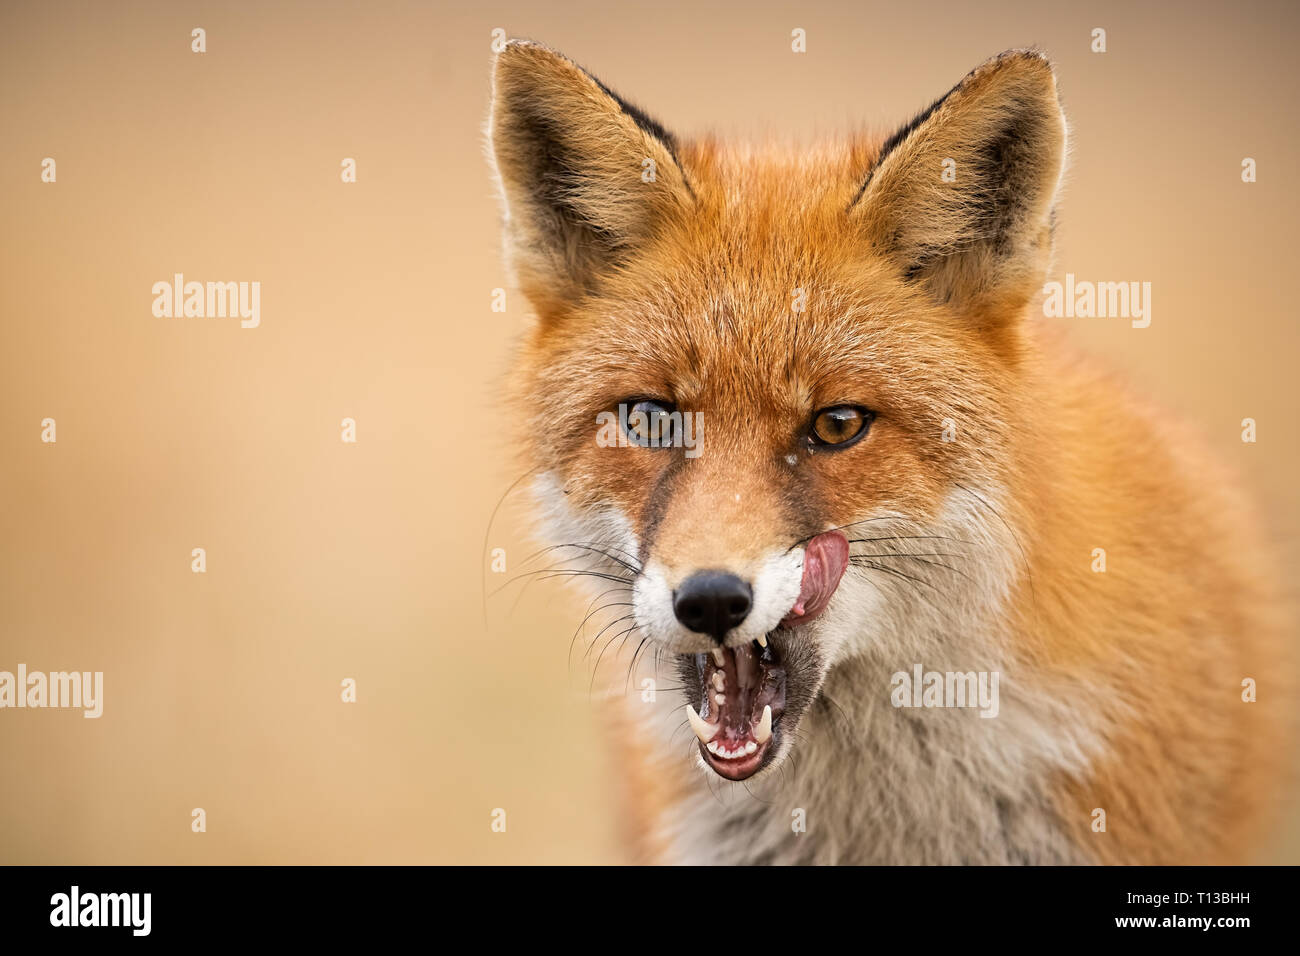 Close-up of head of a red fox, vulpes vulpes, looking straight to the camera licking lips. Stock Photo